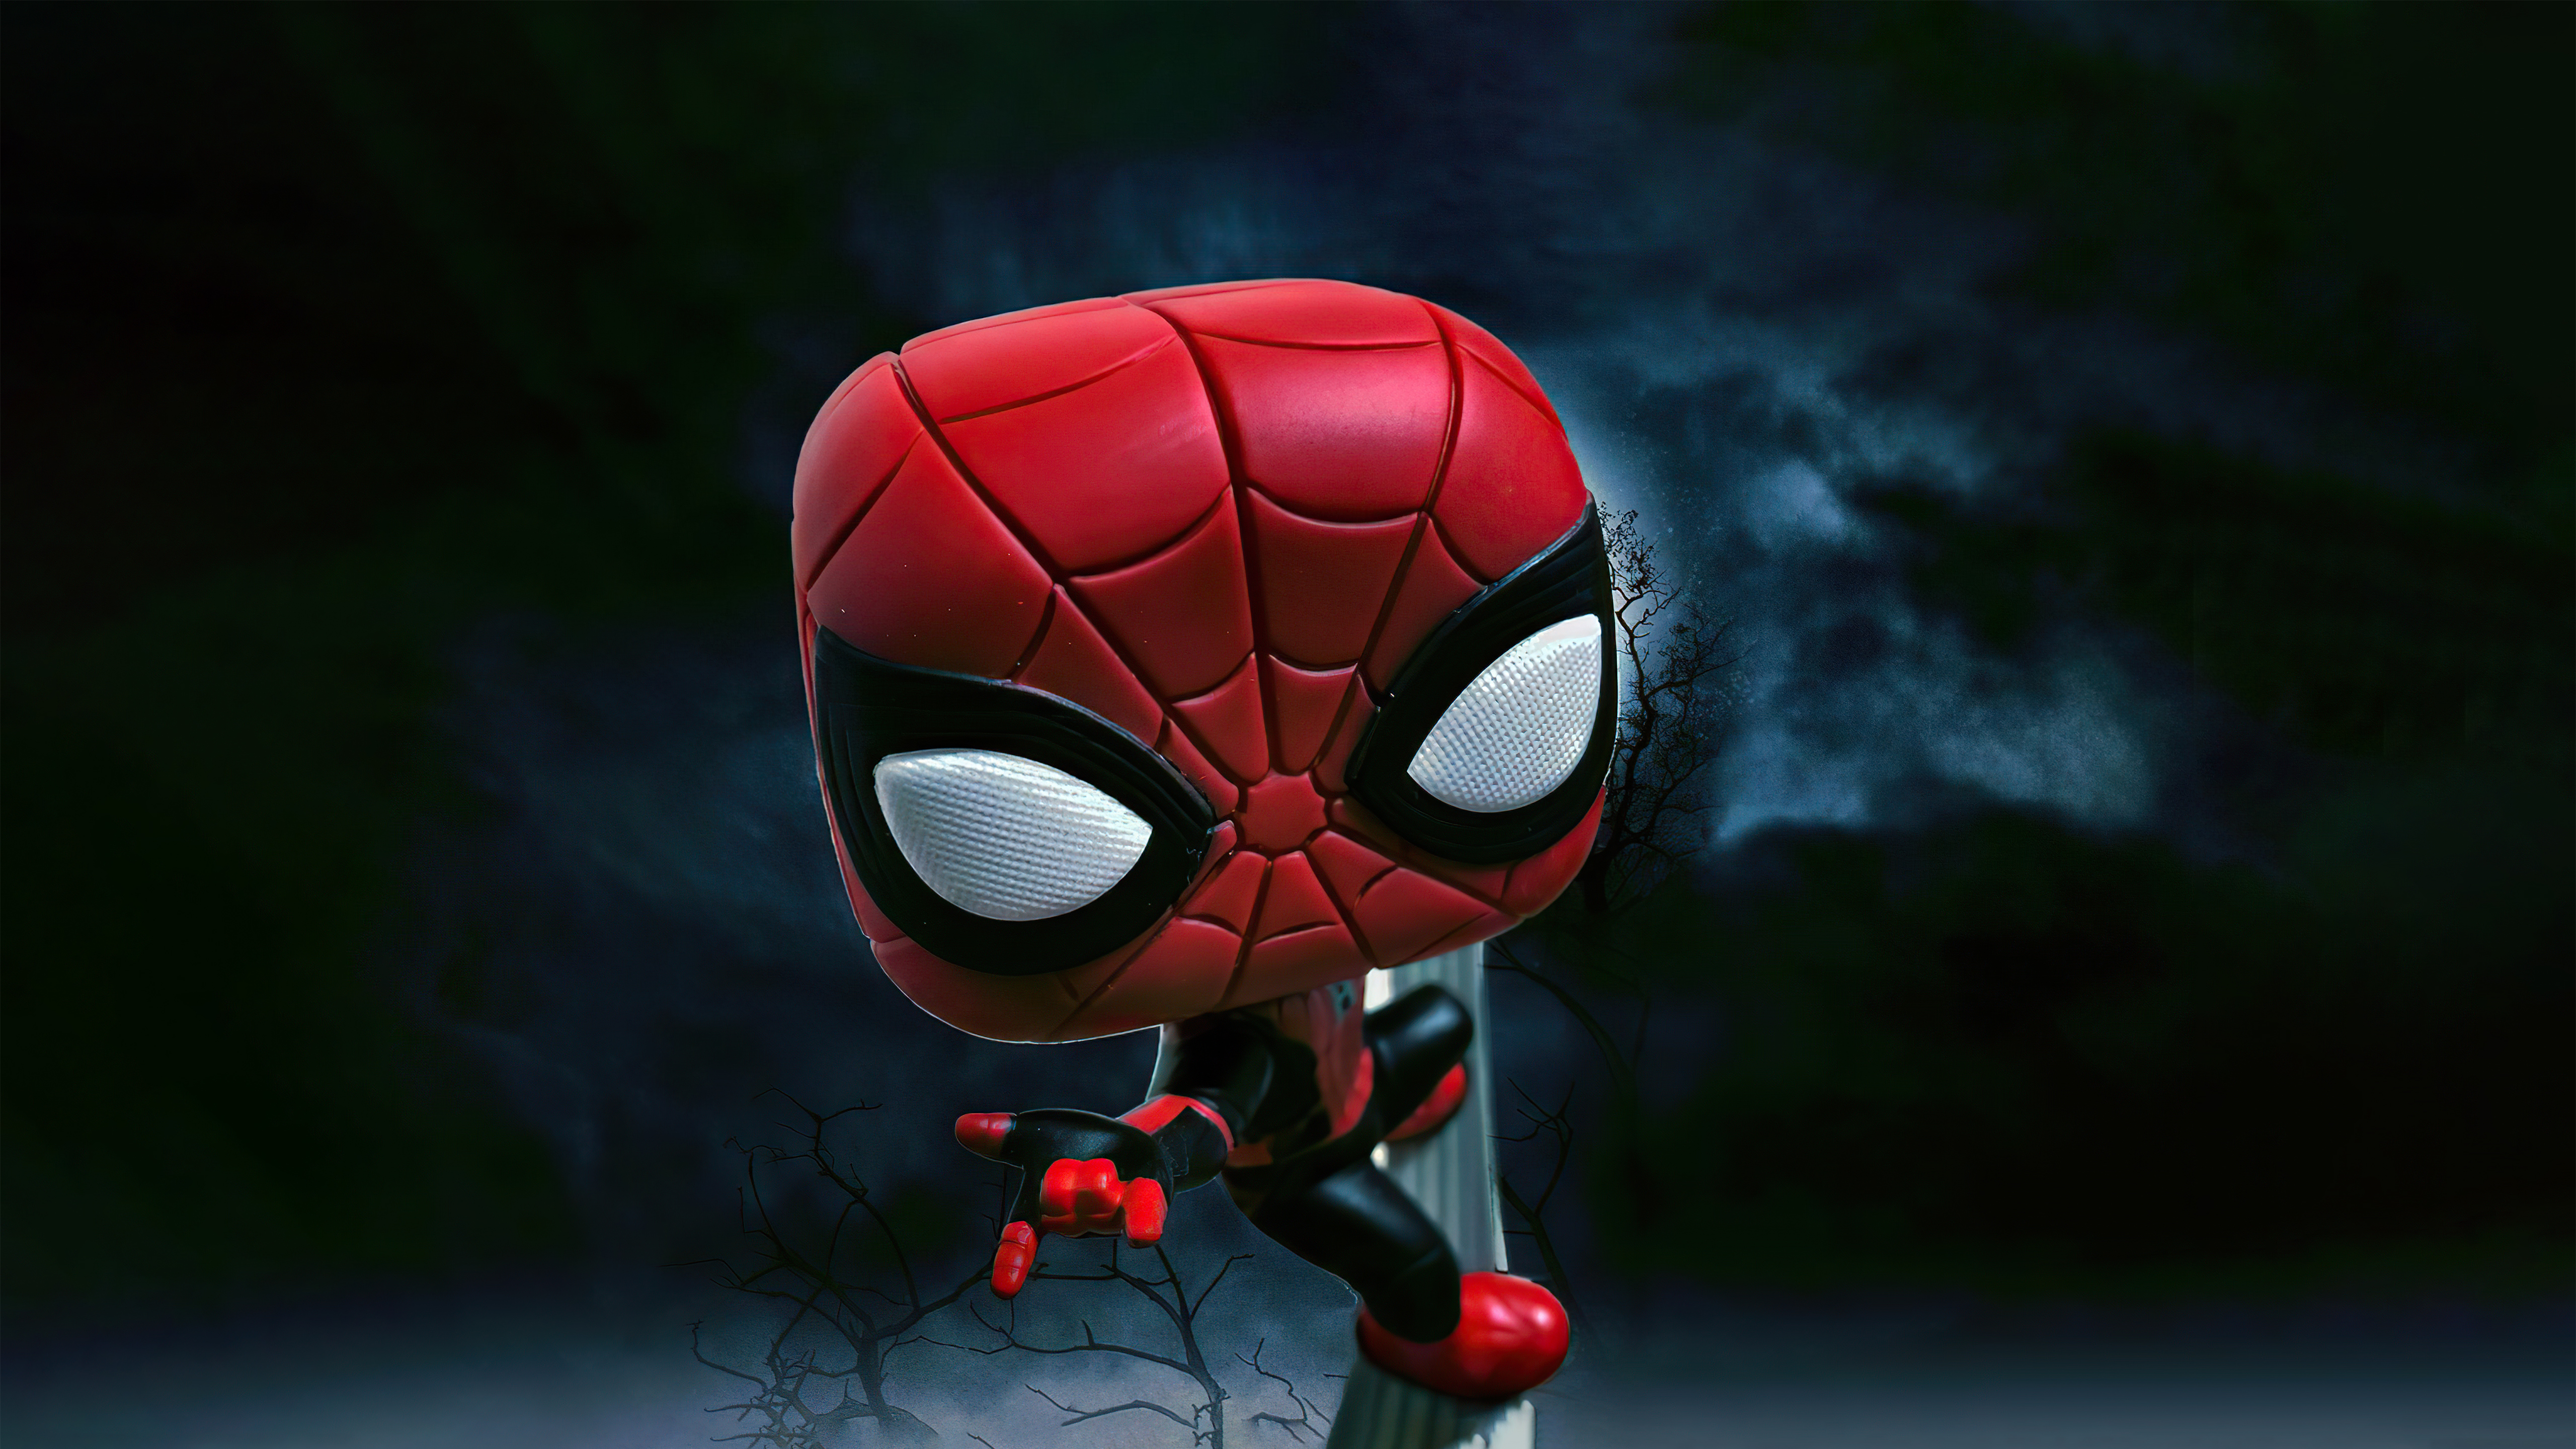 Funko Pop Collectible Figures Wallpaper Collection for iPhone iPad  Android Smartphones  Tablets